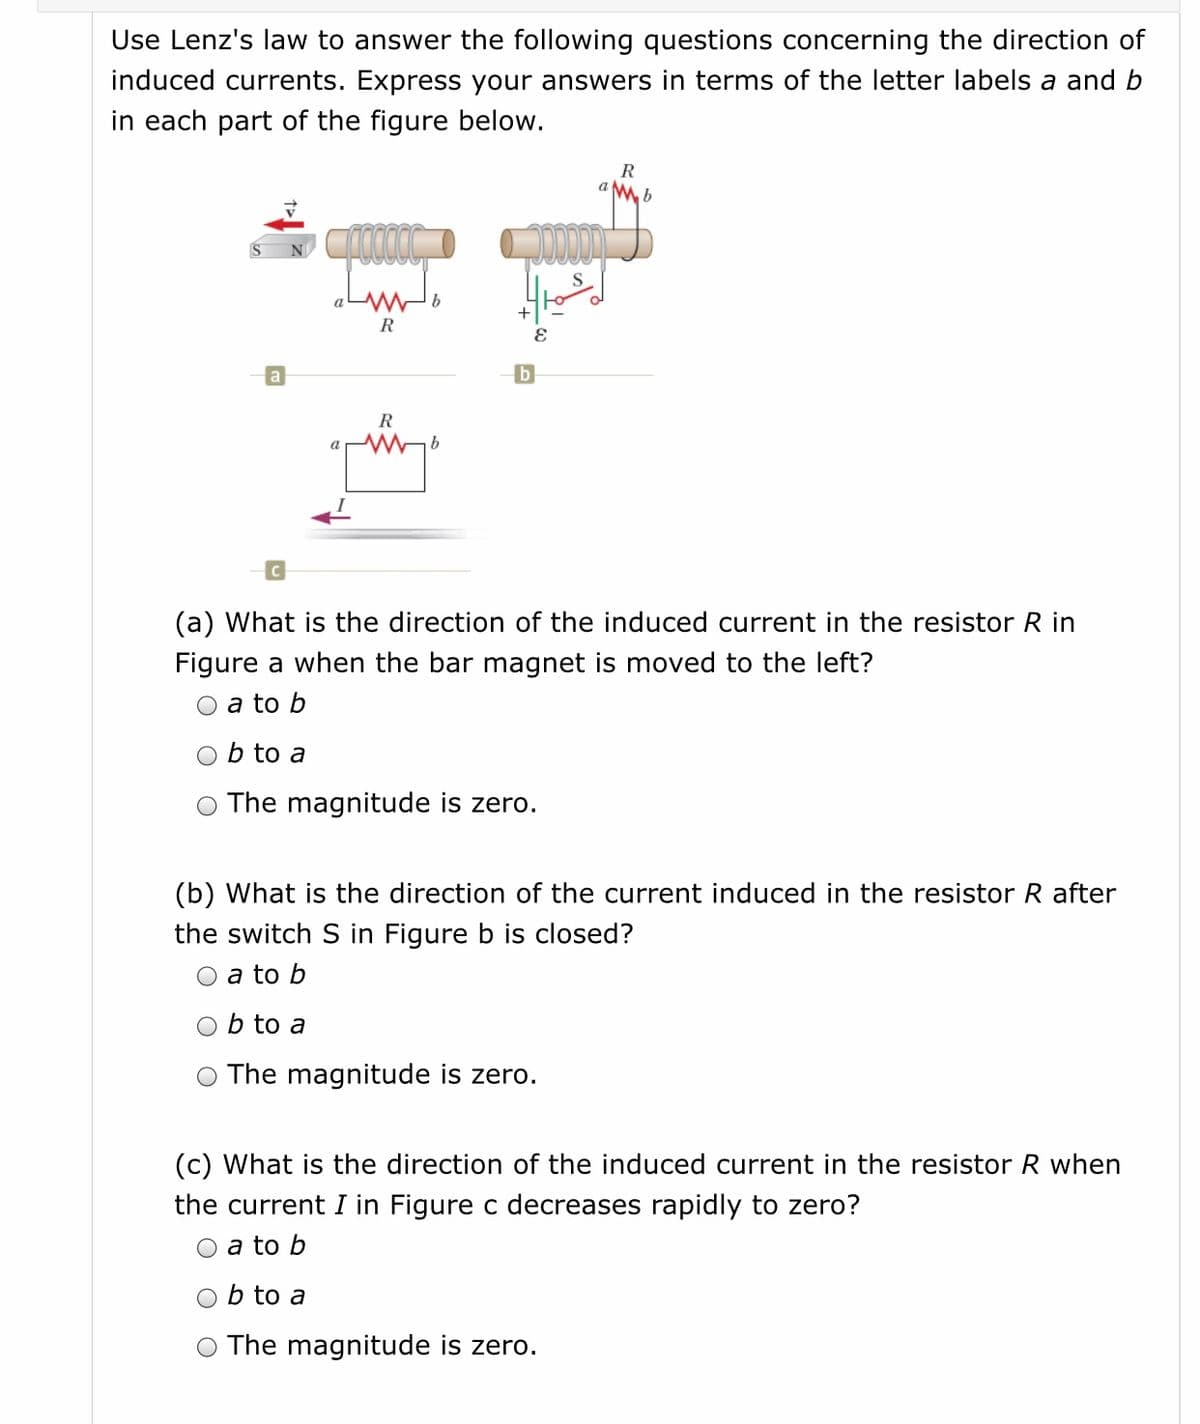 Use Lenz's law to answer the following questions concerning the direction of
induced currents. Express your answers in terms of the letter labels a and b
in each part of the figure below.
R
R
b
R
b.
(a) What is the direction of the induced current in the resistor R in
Figure a when the bar magnet is moved to the left?
a to b
b to a
The magnitude is zero.
(b) What is the direction of the current induced in the resistor R after
the switch S in Figure b is closed?
O a to b
Ob to a
The magnitude is zero.
(c) What is the direction of the induced current in the resistor R when
the current I in Figure c decreases rapidly to zero?
a to b
O b to a
O The magnitude is zero.
